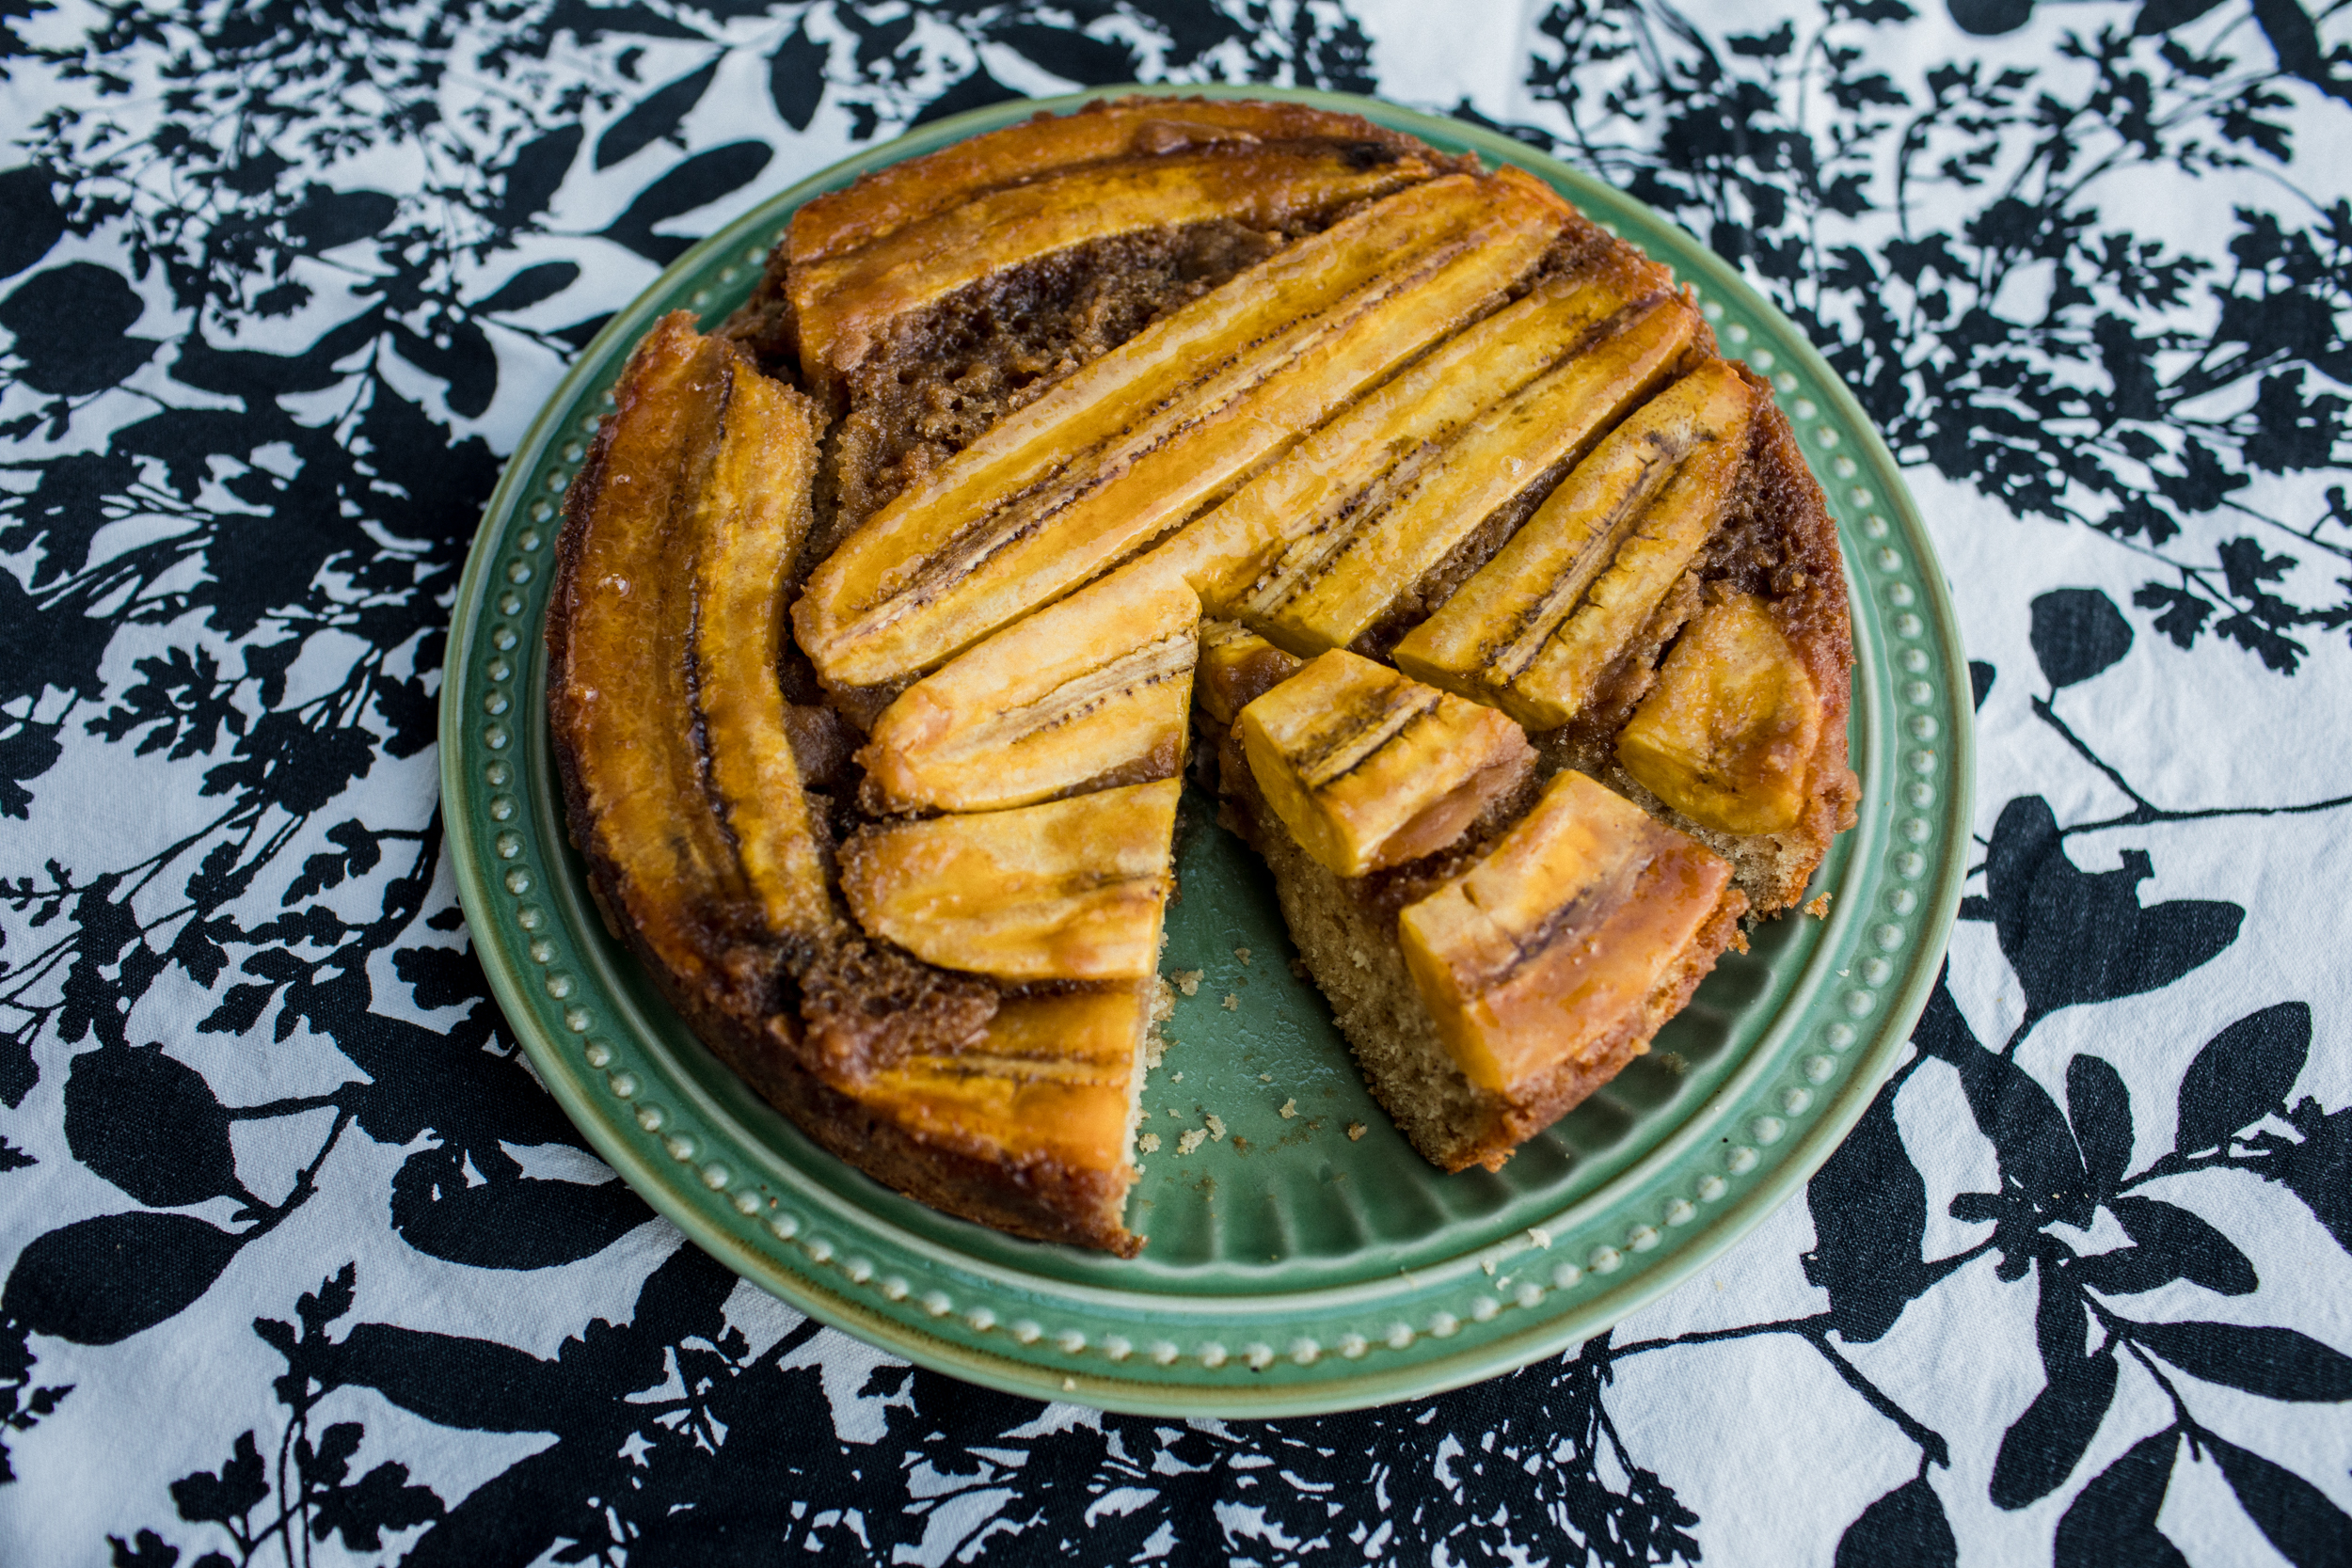 Plantain upside down cake with a slice cut out, served on a green plate on a patterned tablecloth.